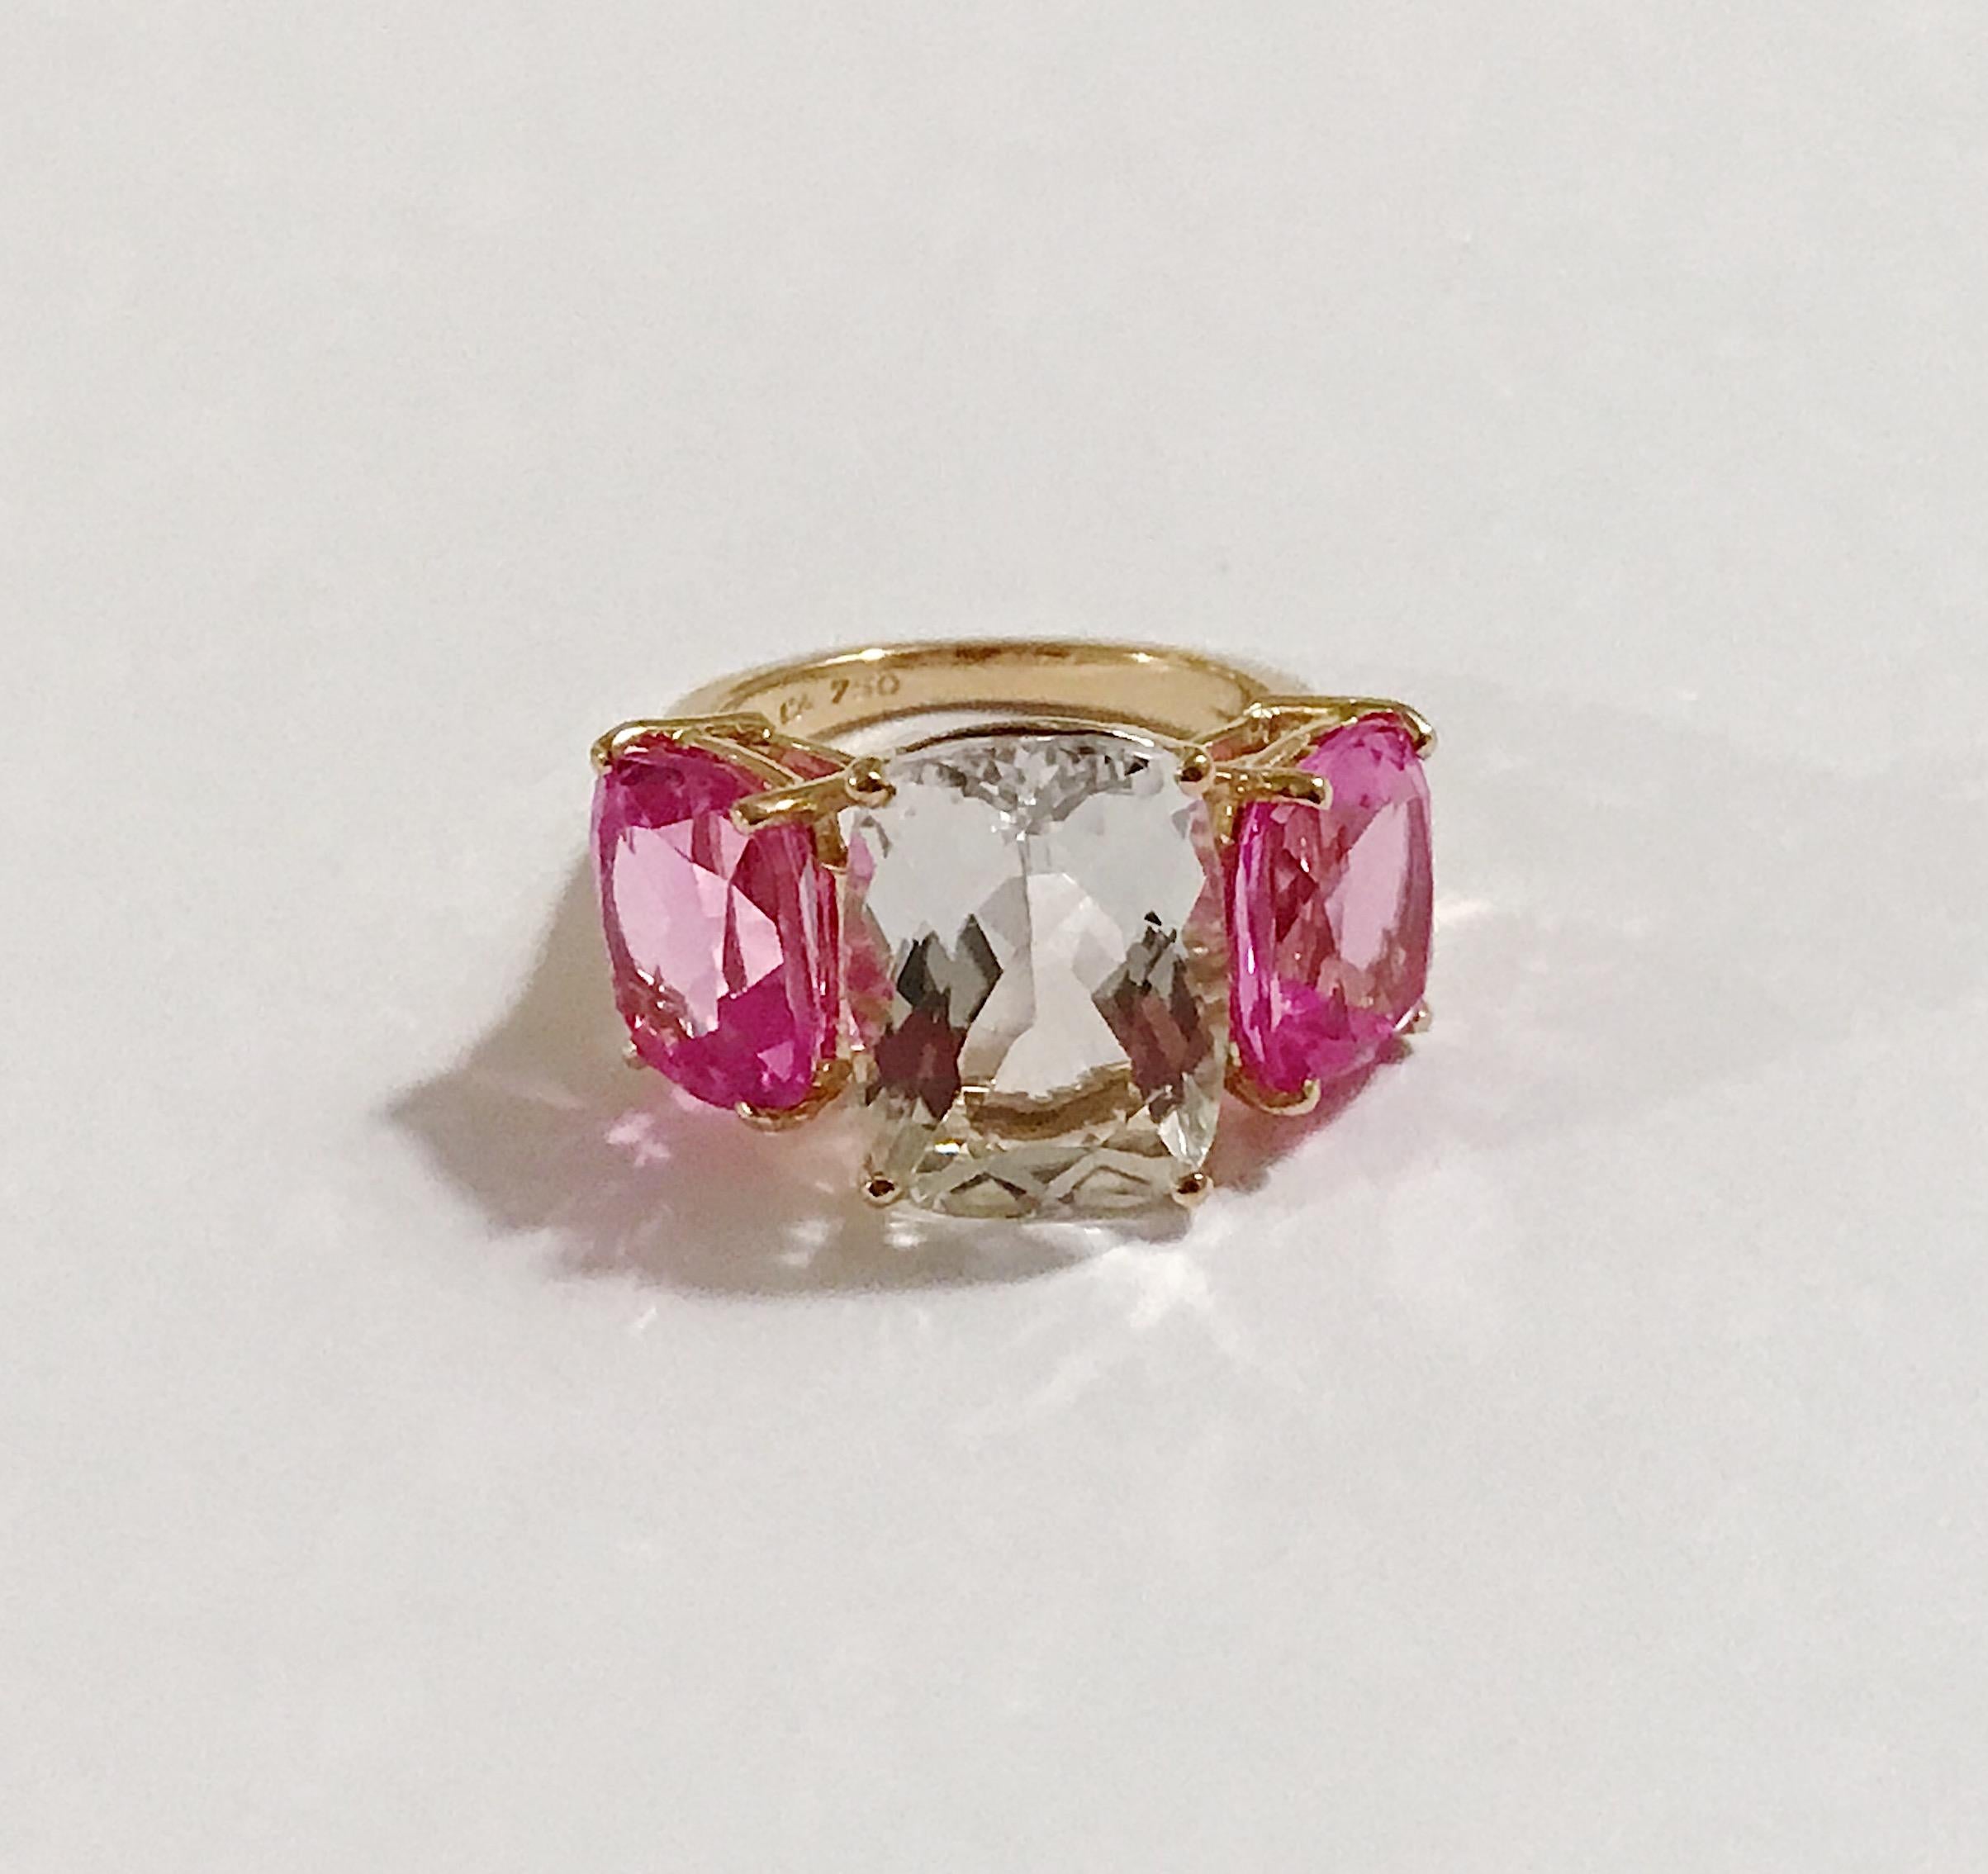 18kt Yellow Gold Three Stone faceted Cushion Ring with center Rock Crystal and two Hot Pink Topaz finished with a tapered split shank.

This elegant cocktail ring measures 1 1/4